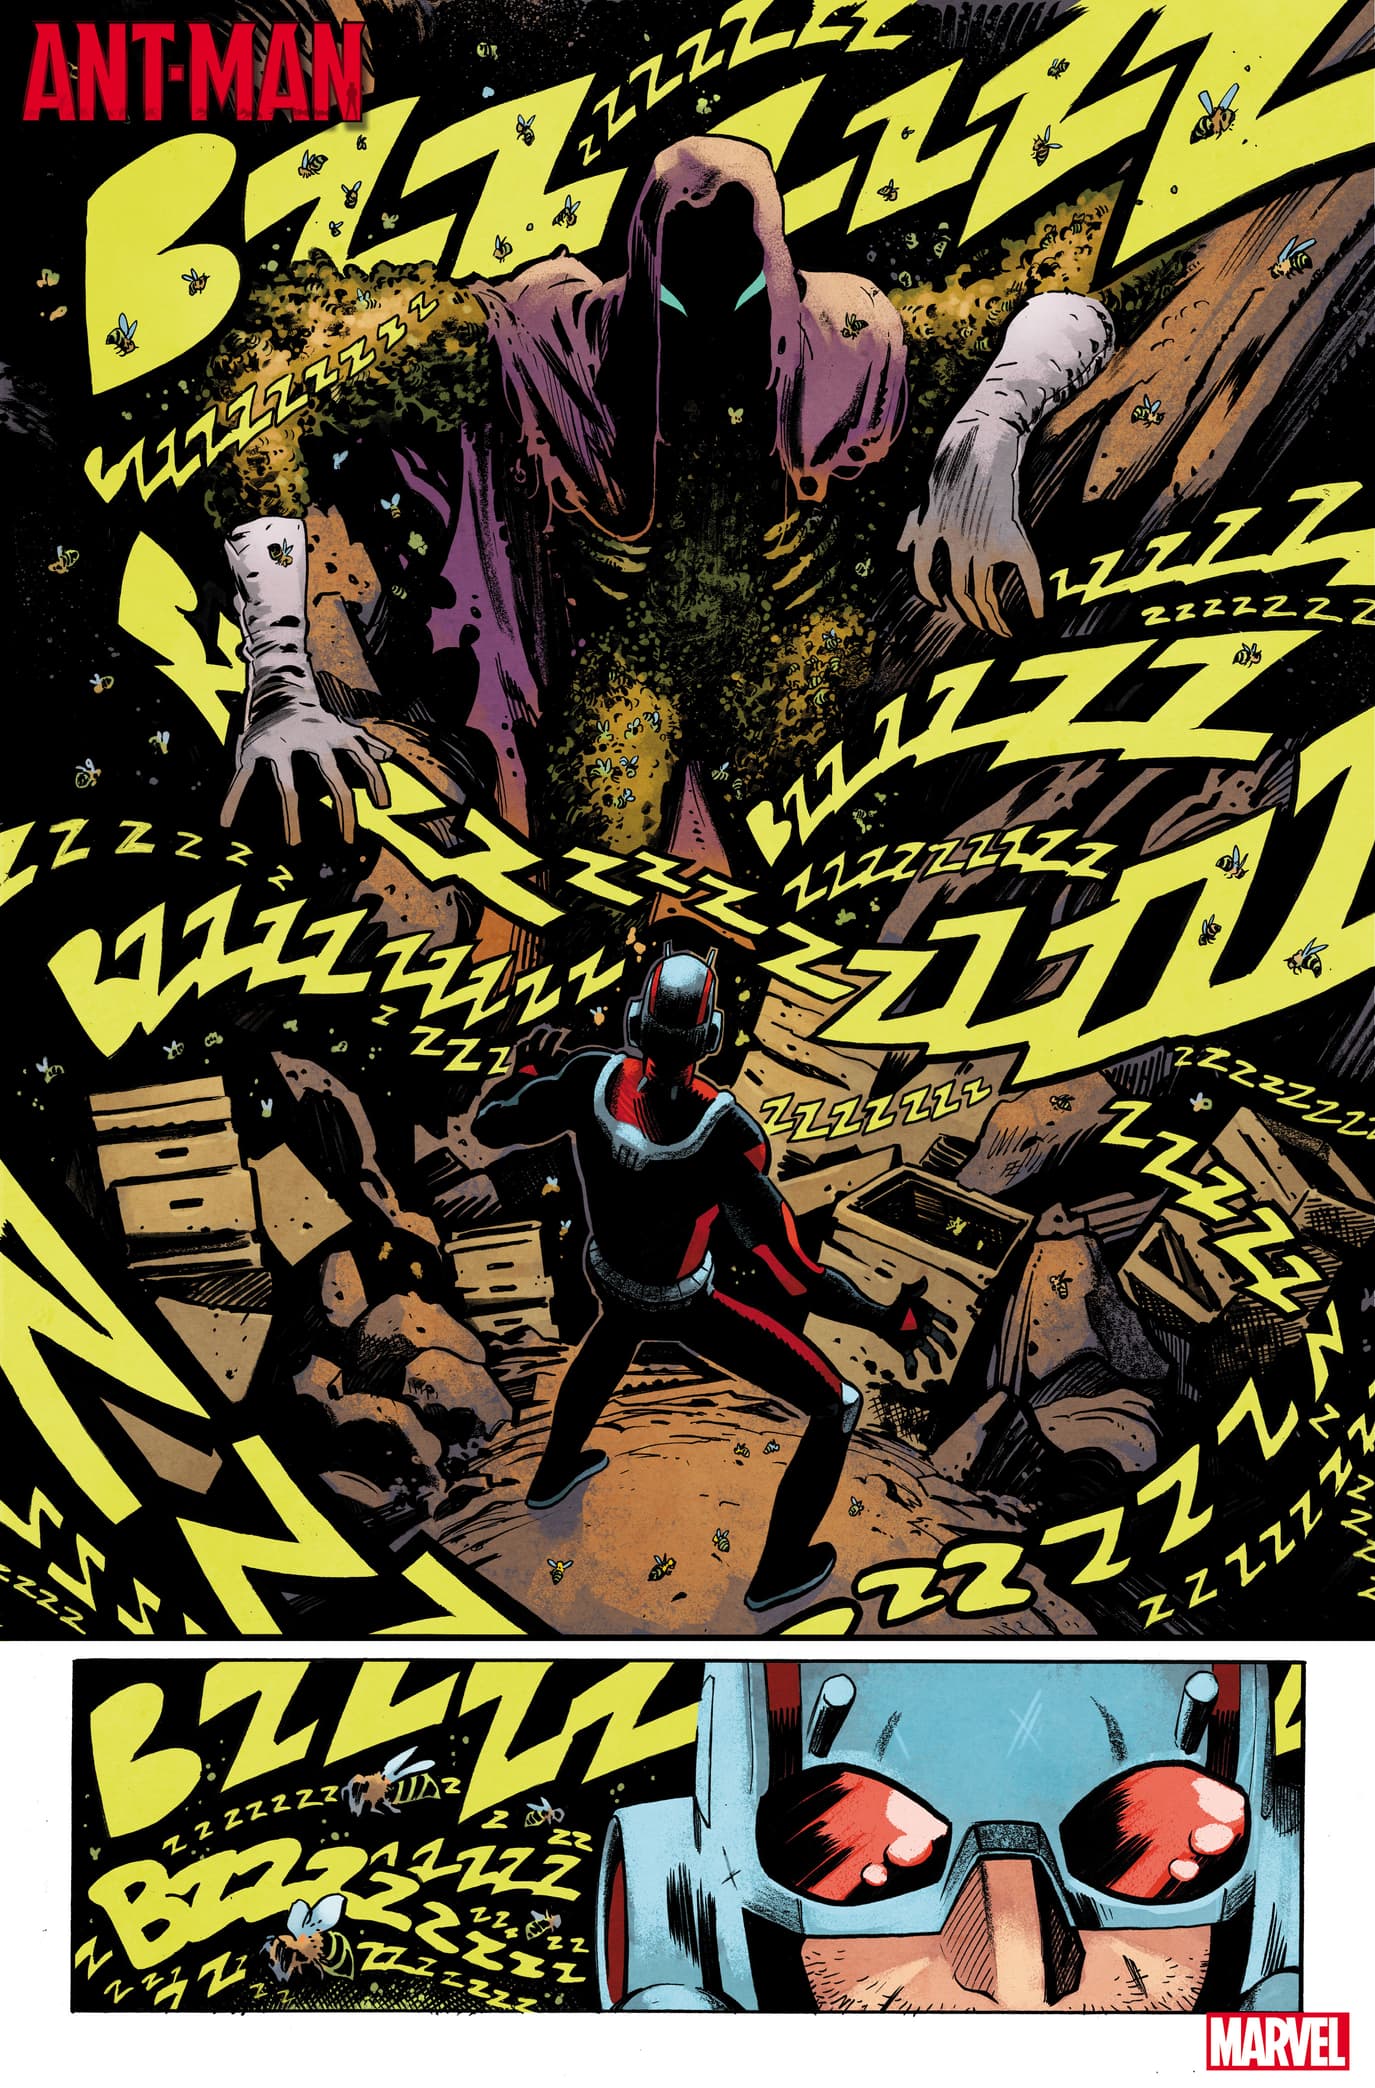 Ant-Man #1 preview art